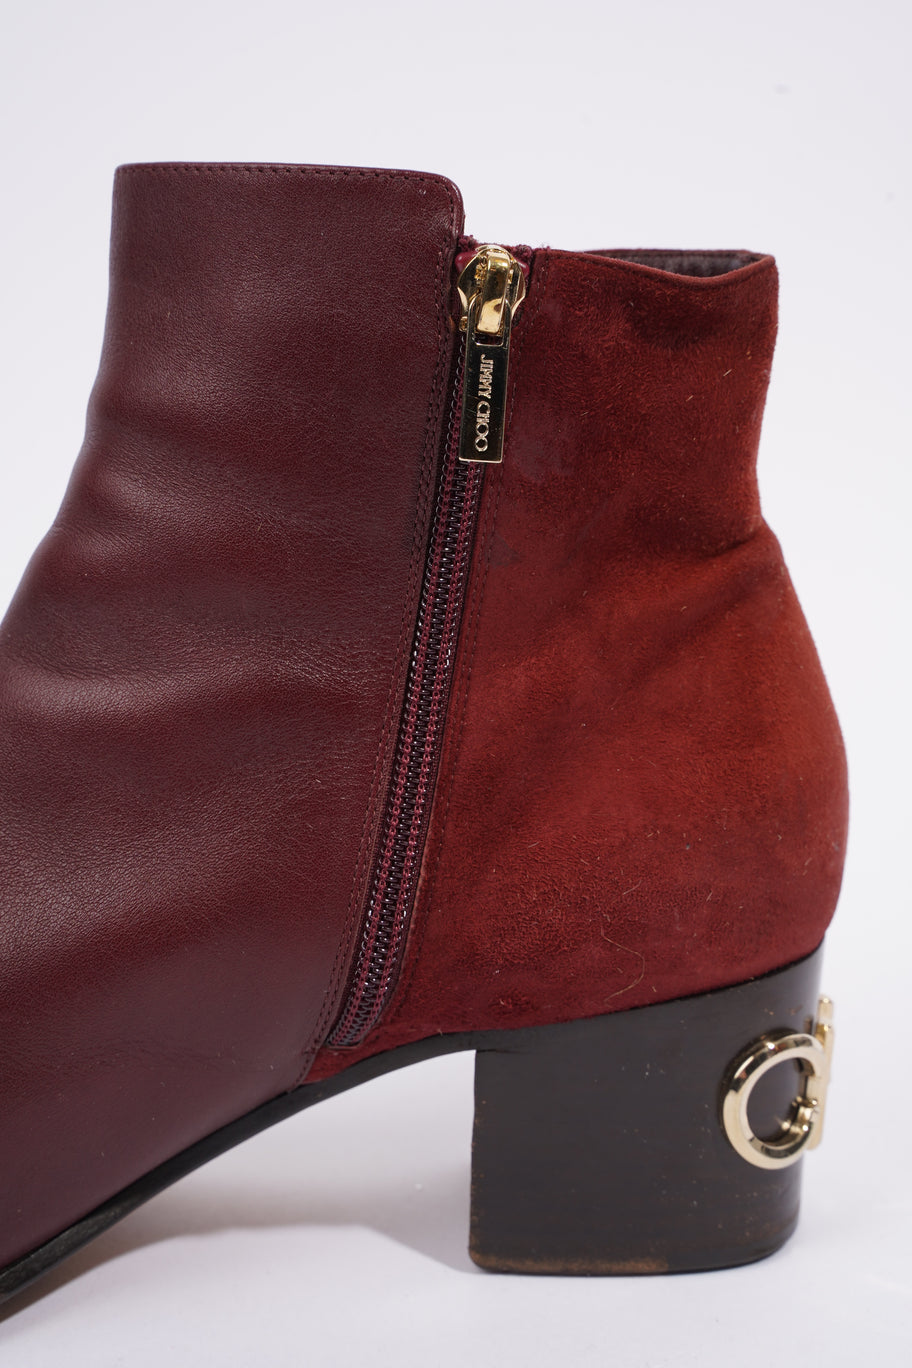 Ankle Boot Red Leather EU 41 UK 8 Image 11